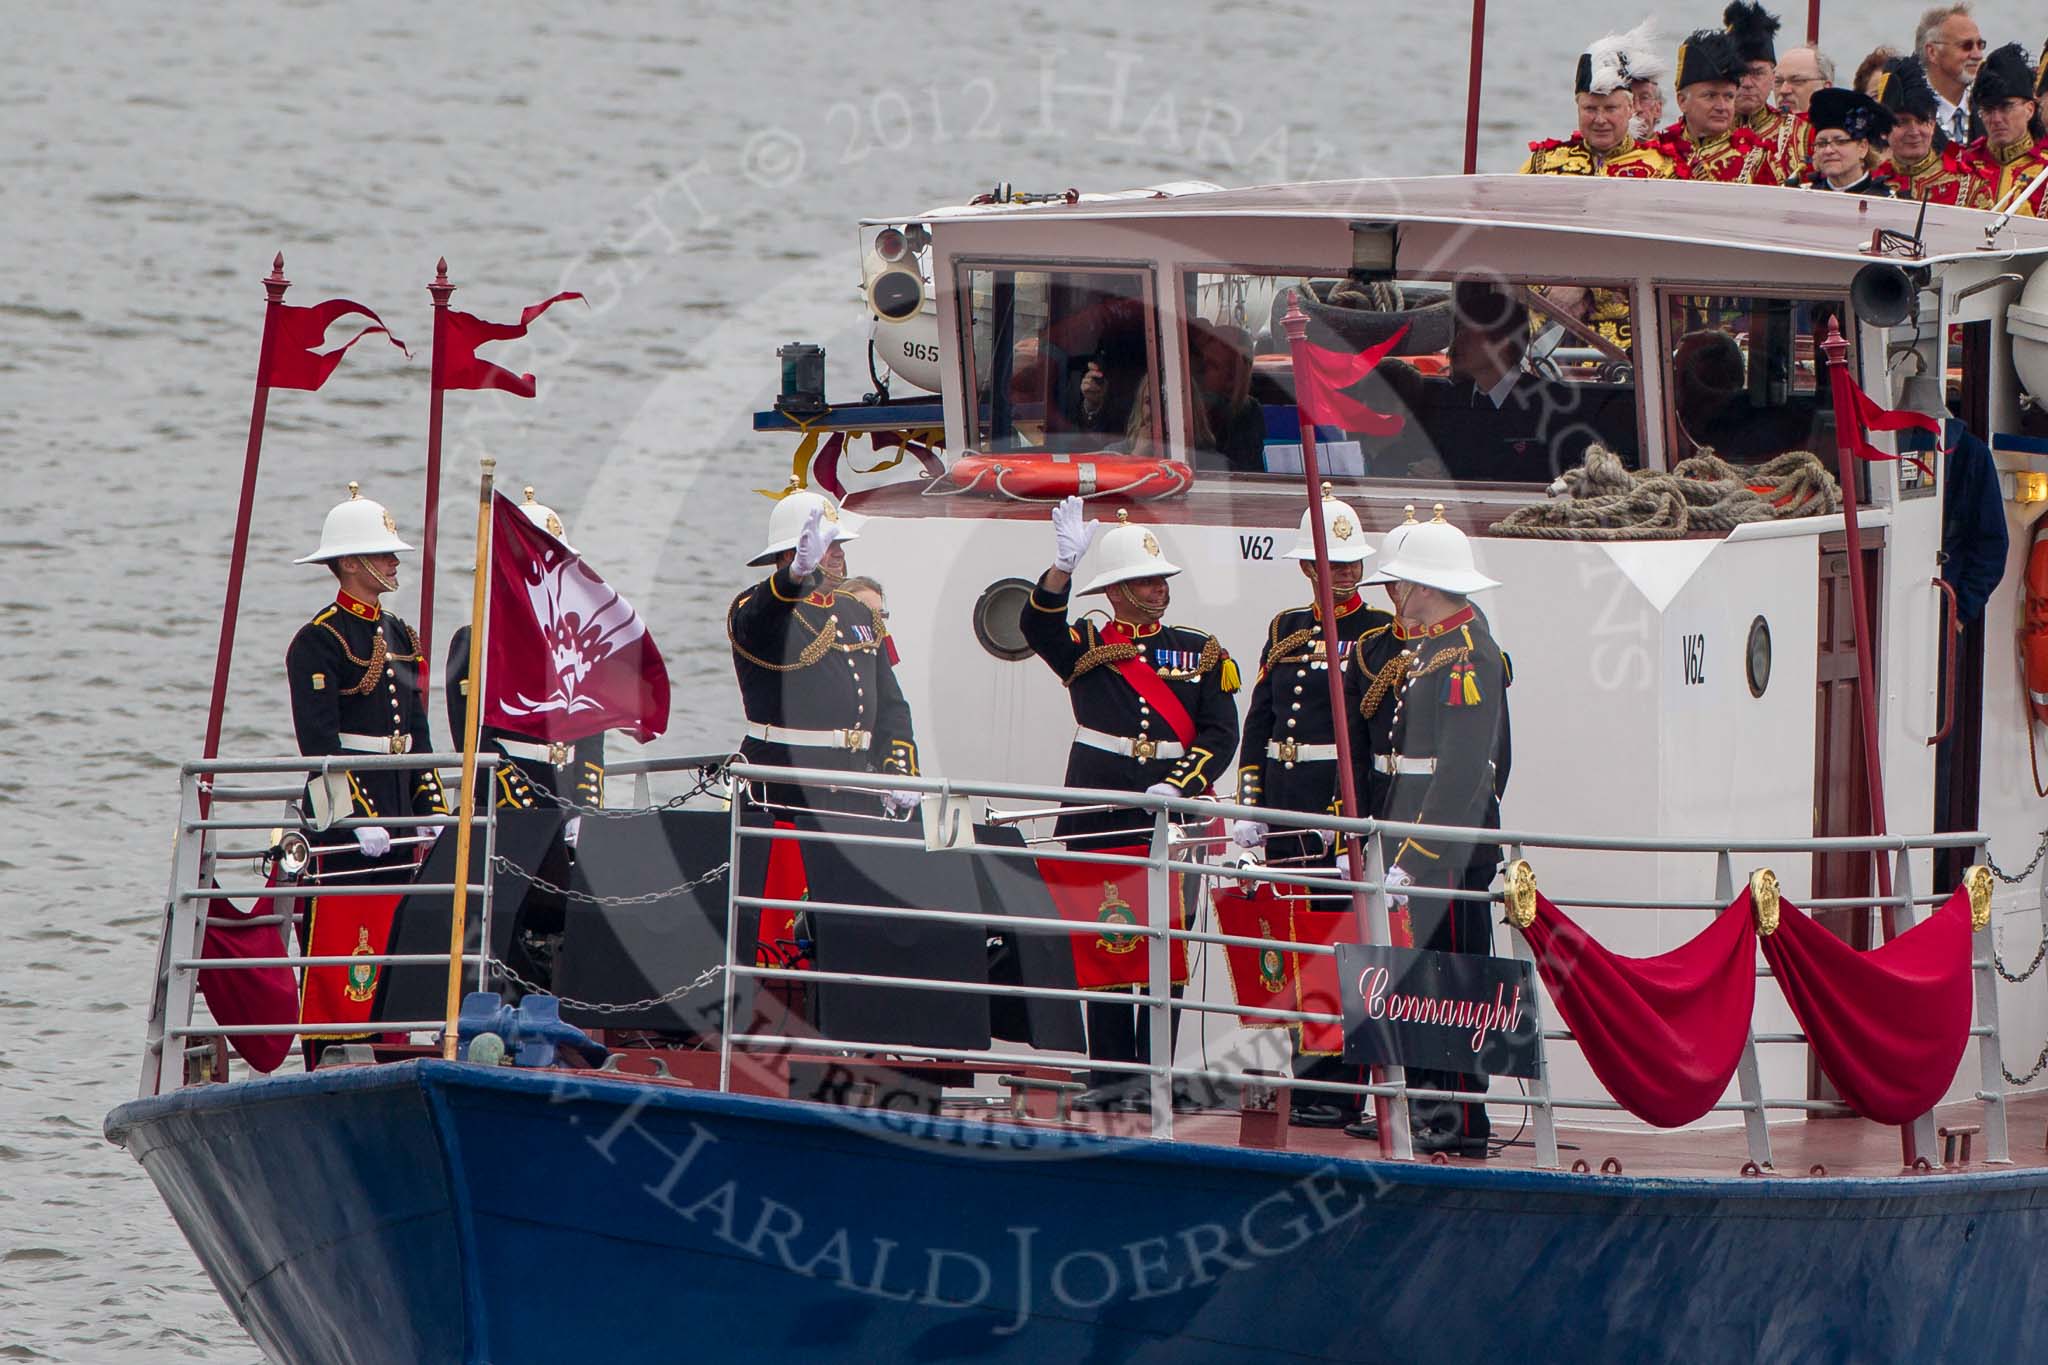 Thames Diamond Jubilee Pageant: ROYAL MARINES HERALD FANFARE TEAM-Connaught (V62)..
River Thames seen from Battersea Bridge,
London,

United Kingdom,
on 03 June 2012 at 14:55, image #163